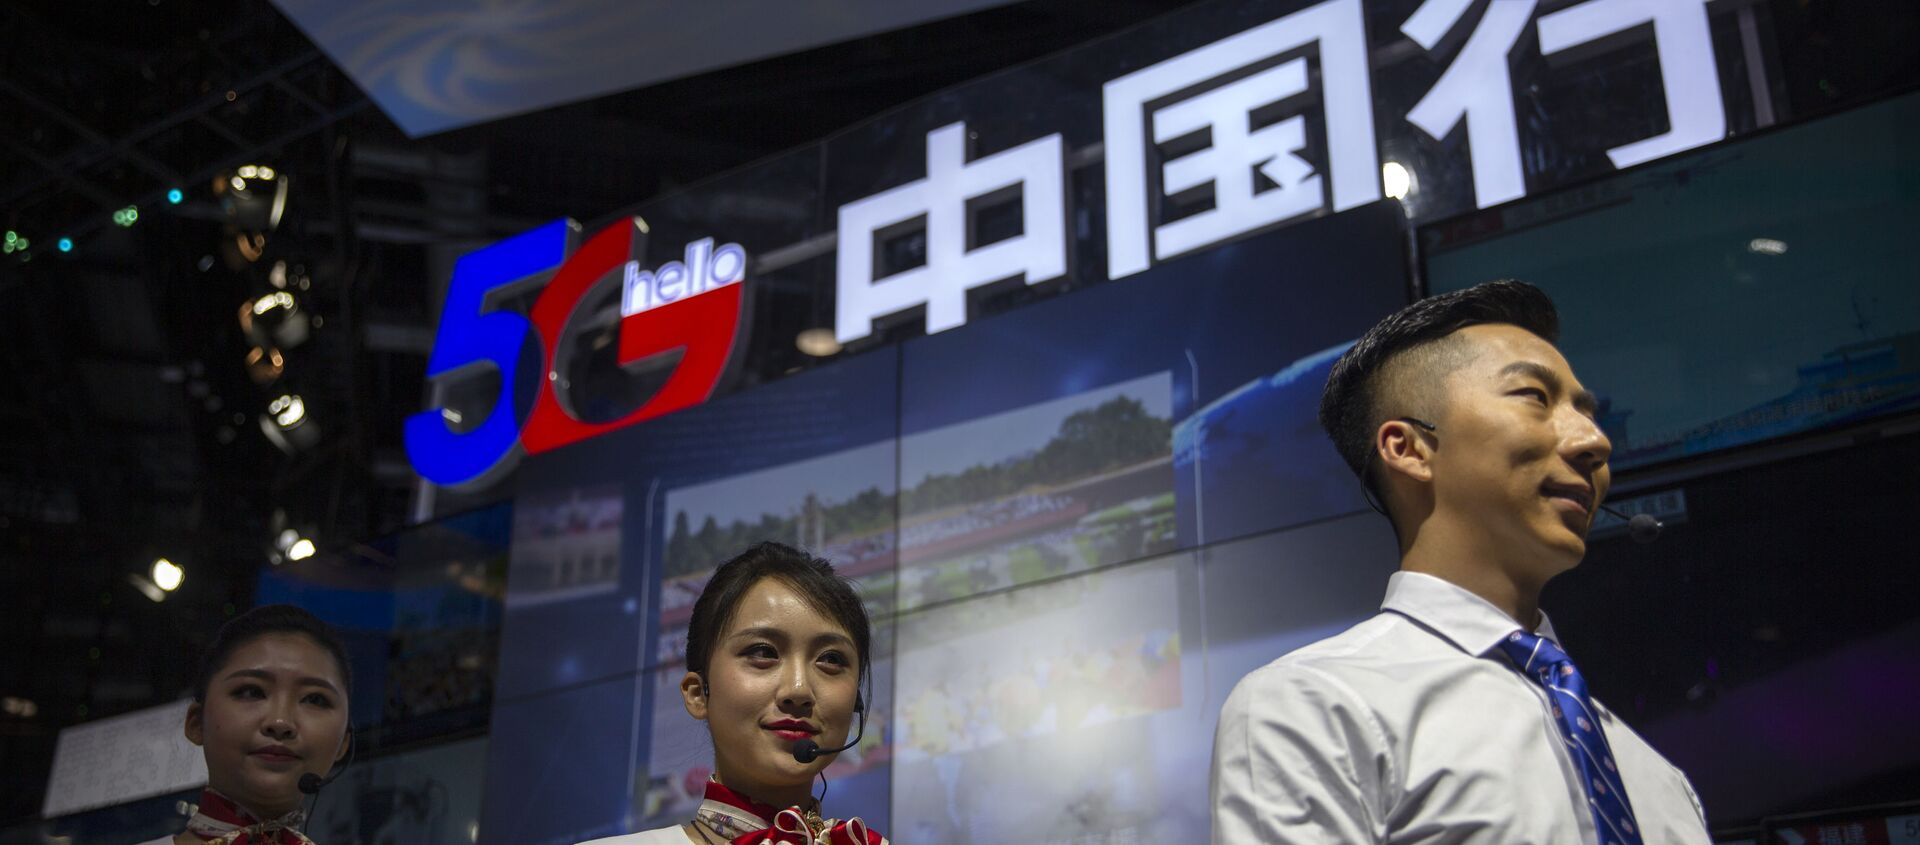 Staff members stand at a display for 5G services from Chinese technology firm China Telecom at the PT Expo in Beijing, Thursday, Oct. 31, 2019. - Sputnik International, 1920, 09.06.2020